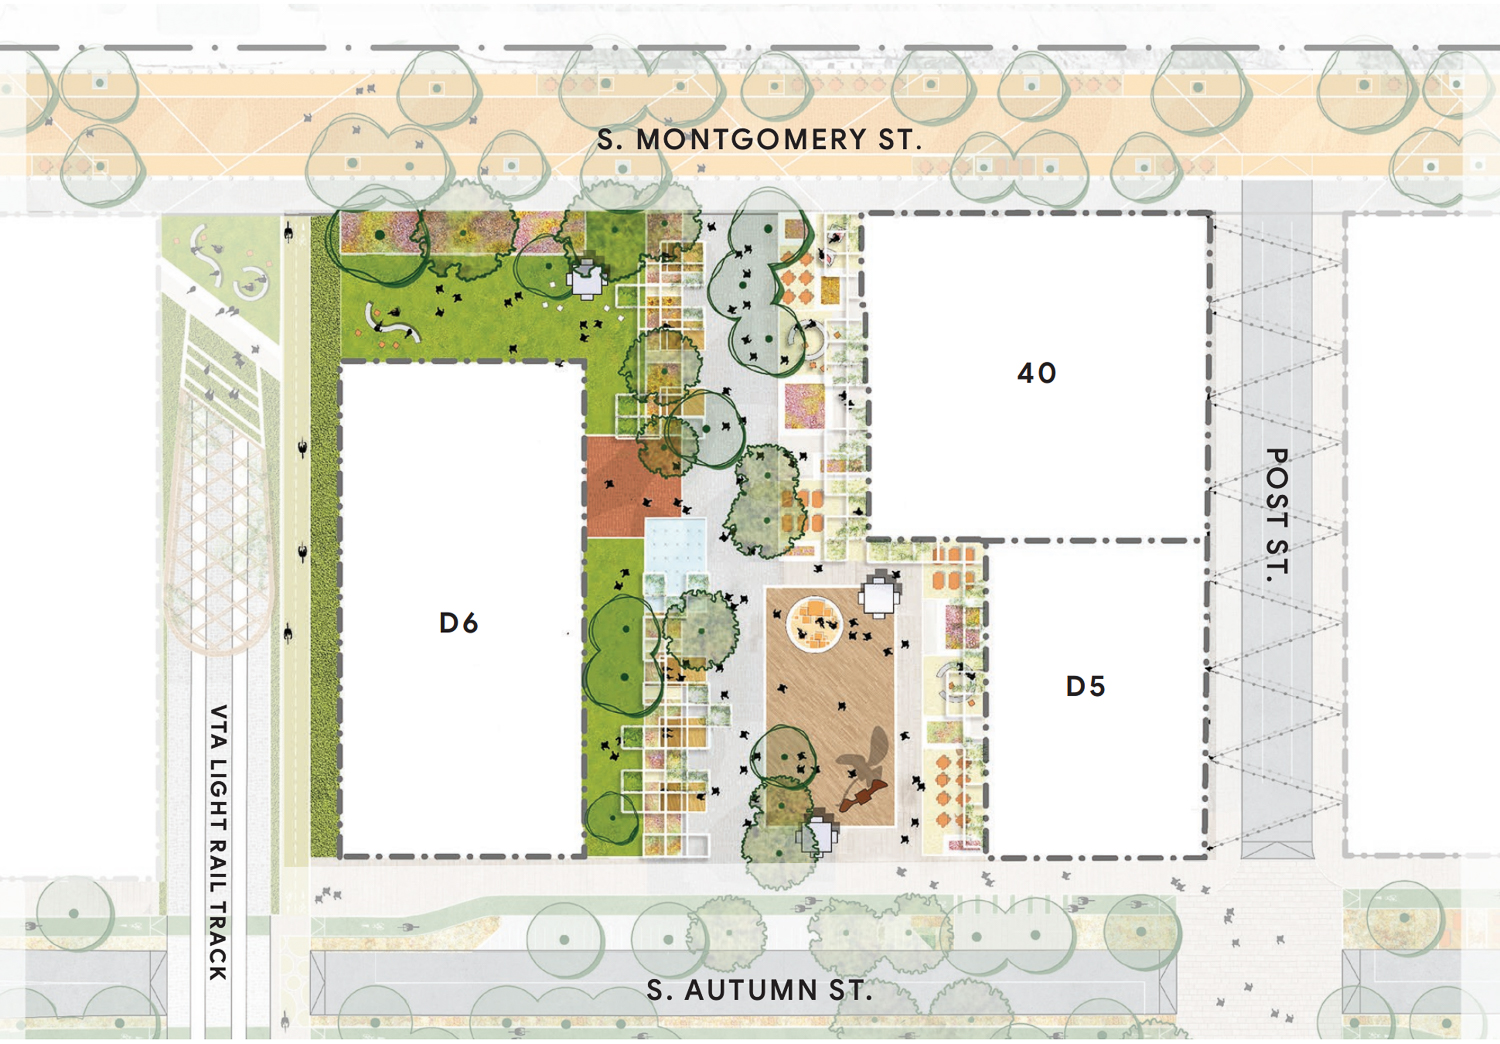 Downtown West Parcels D5, D6 landscaping, image from the Downtown West Design Standards Guidelines